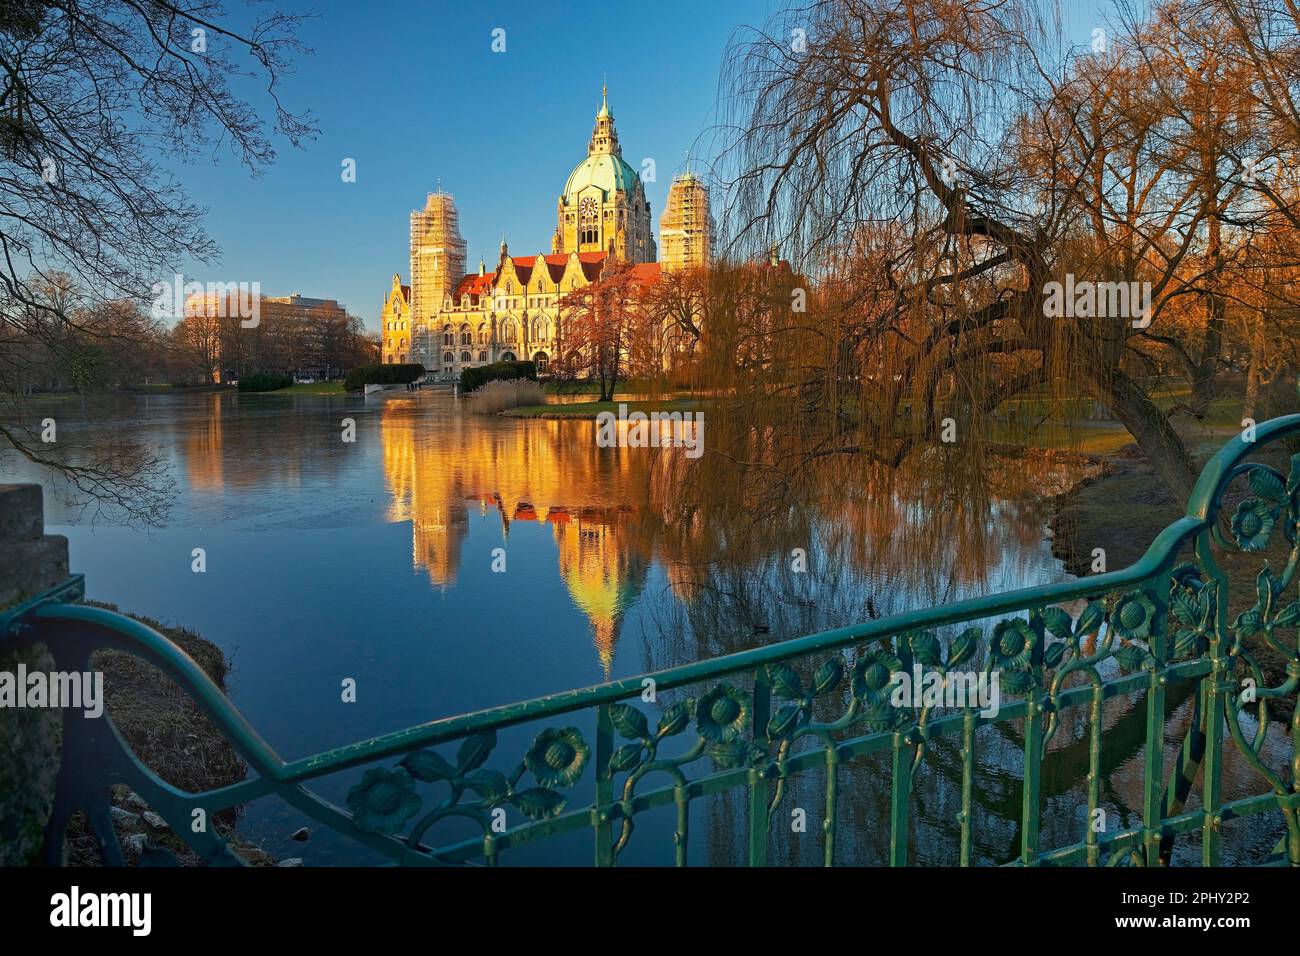 New townhall with Maschpark bridge and Masch pond, Germany, Lower Saxony, Hanover Stock Photo